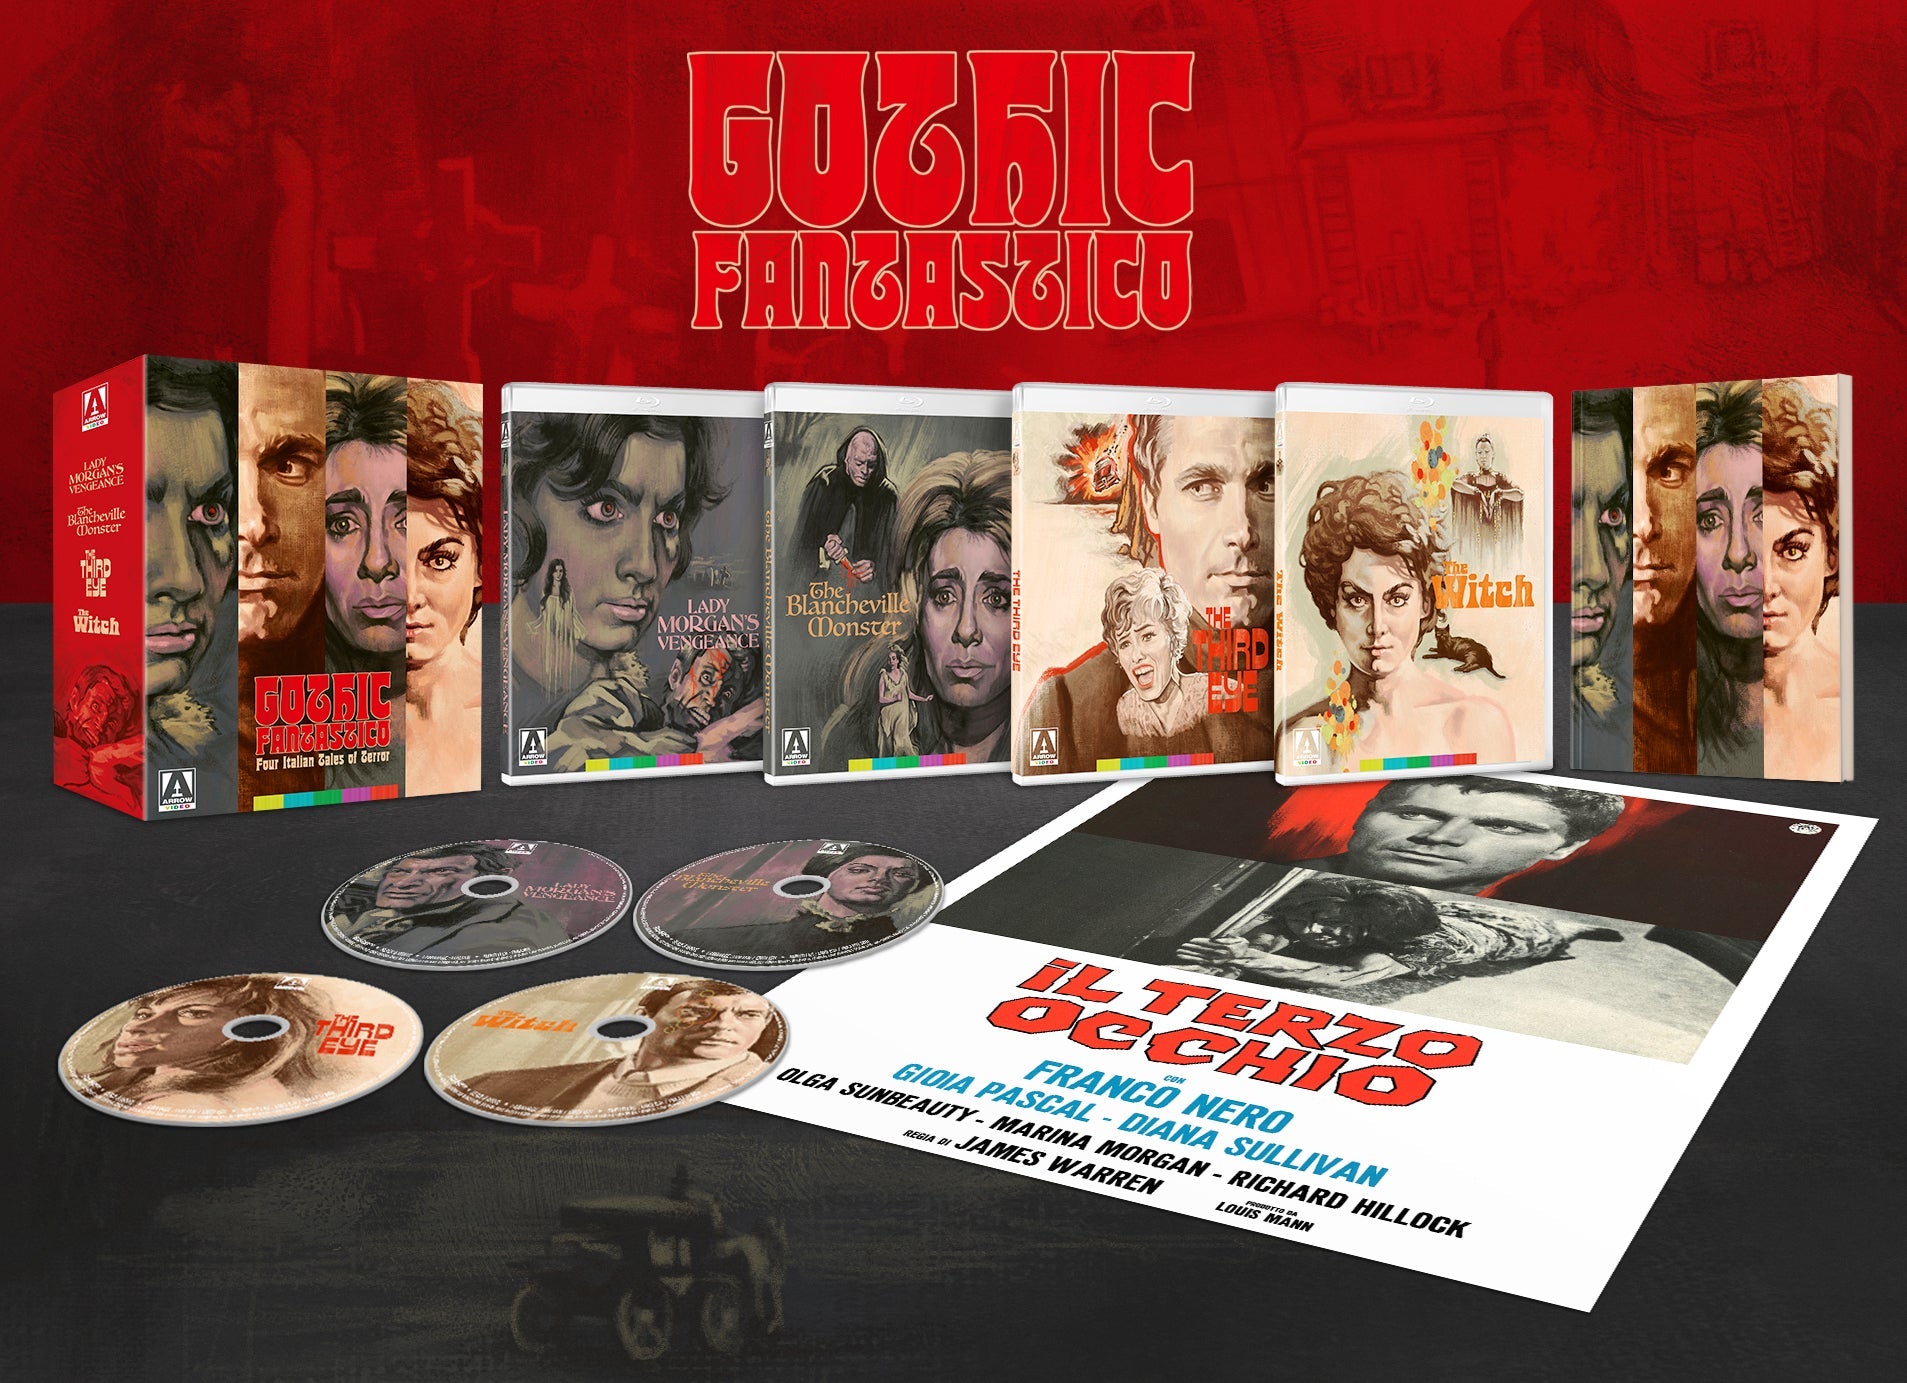 GOTHIC FANTASTICO: FOUR ITALIAN TALES OF TERROR (LIMITED EDITION) BLU-RAY [SCRATCH AND DENT]